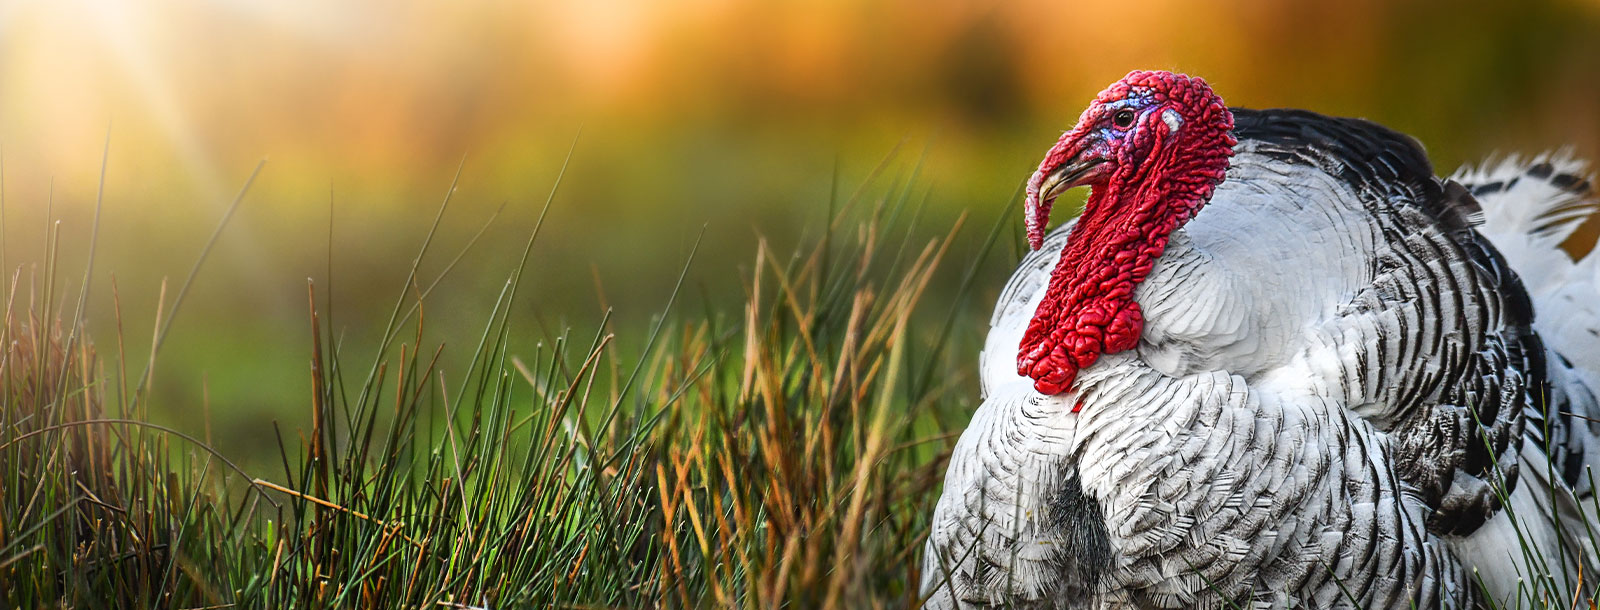 Up close picture of a big turkey sitting in a grassy field.